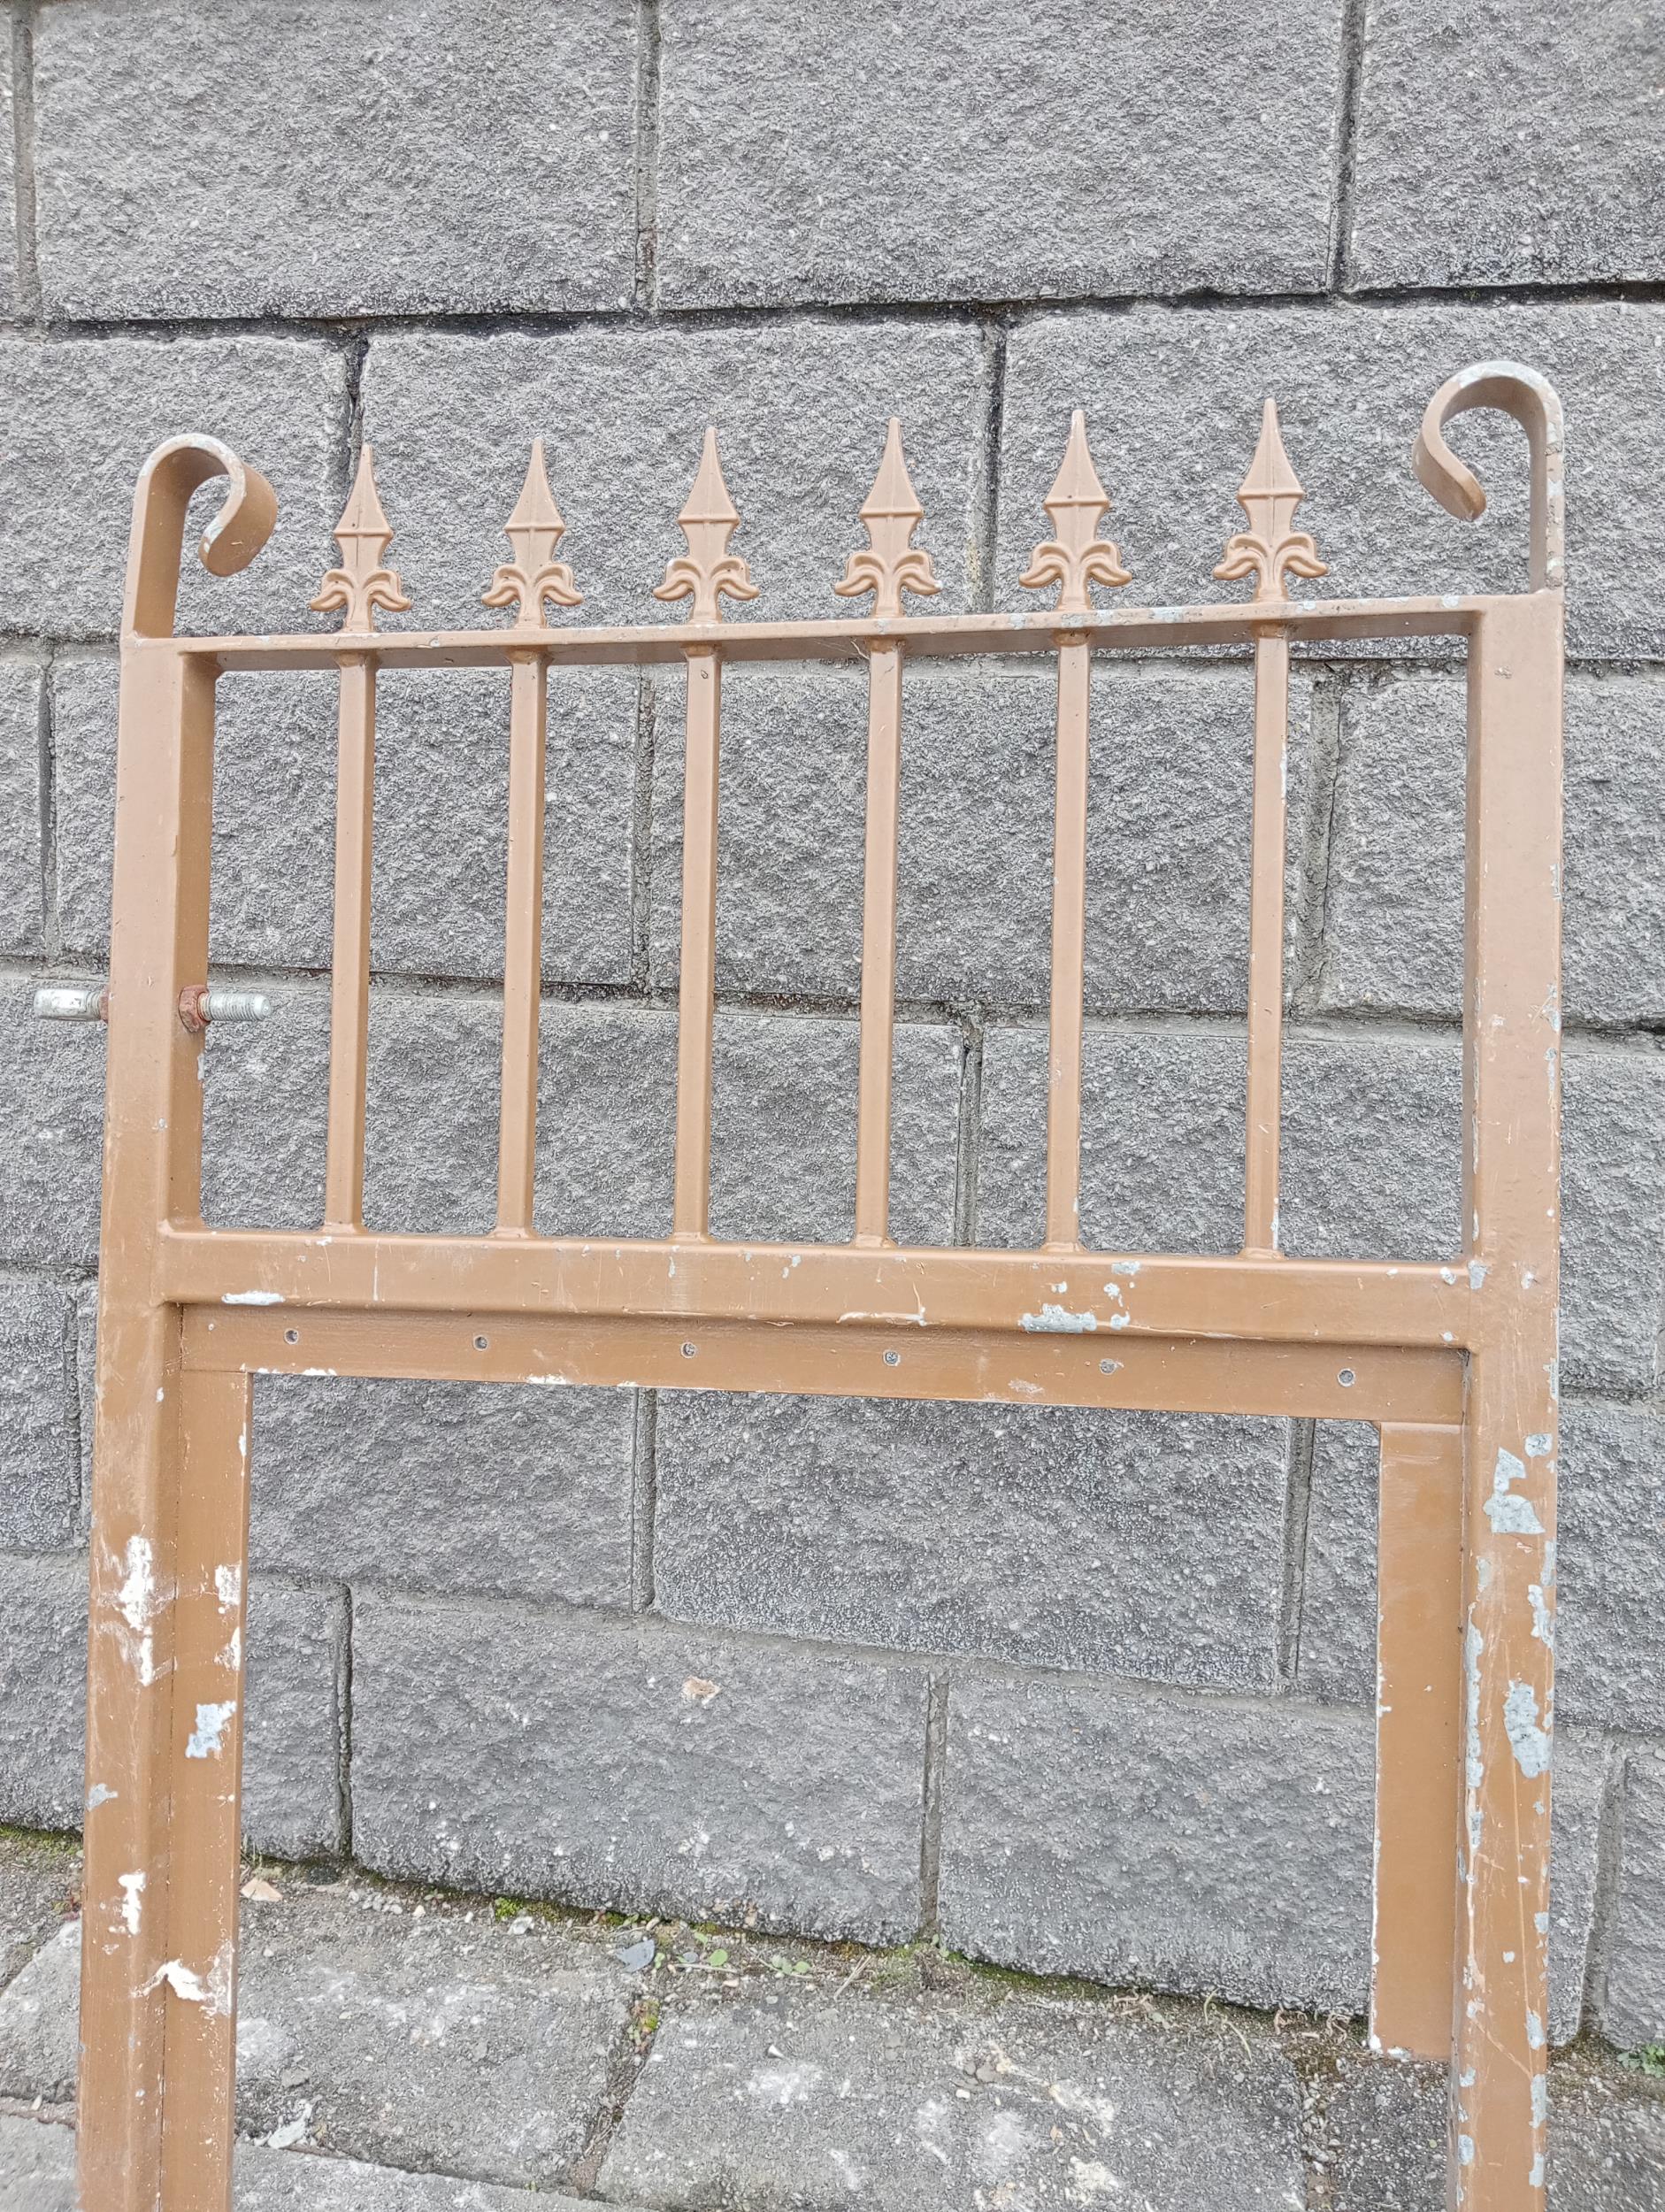 Modern wrought iron gate with Fleur de Lis {}. (NOT AVAILABLE TO VIEW IN PERSON) - Image 2 of 2